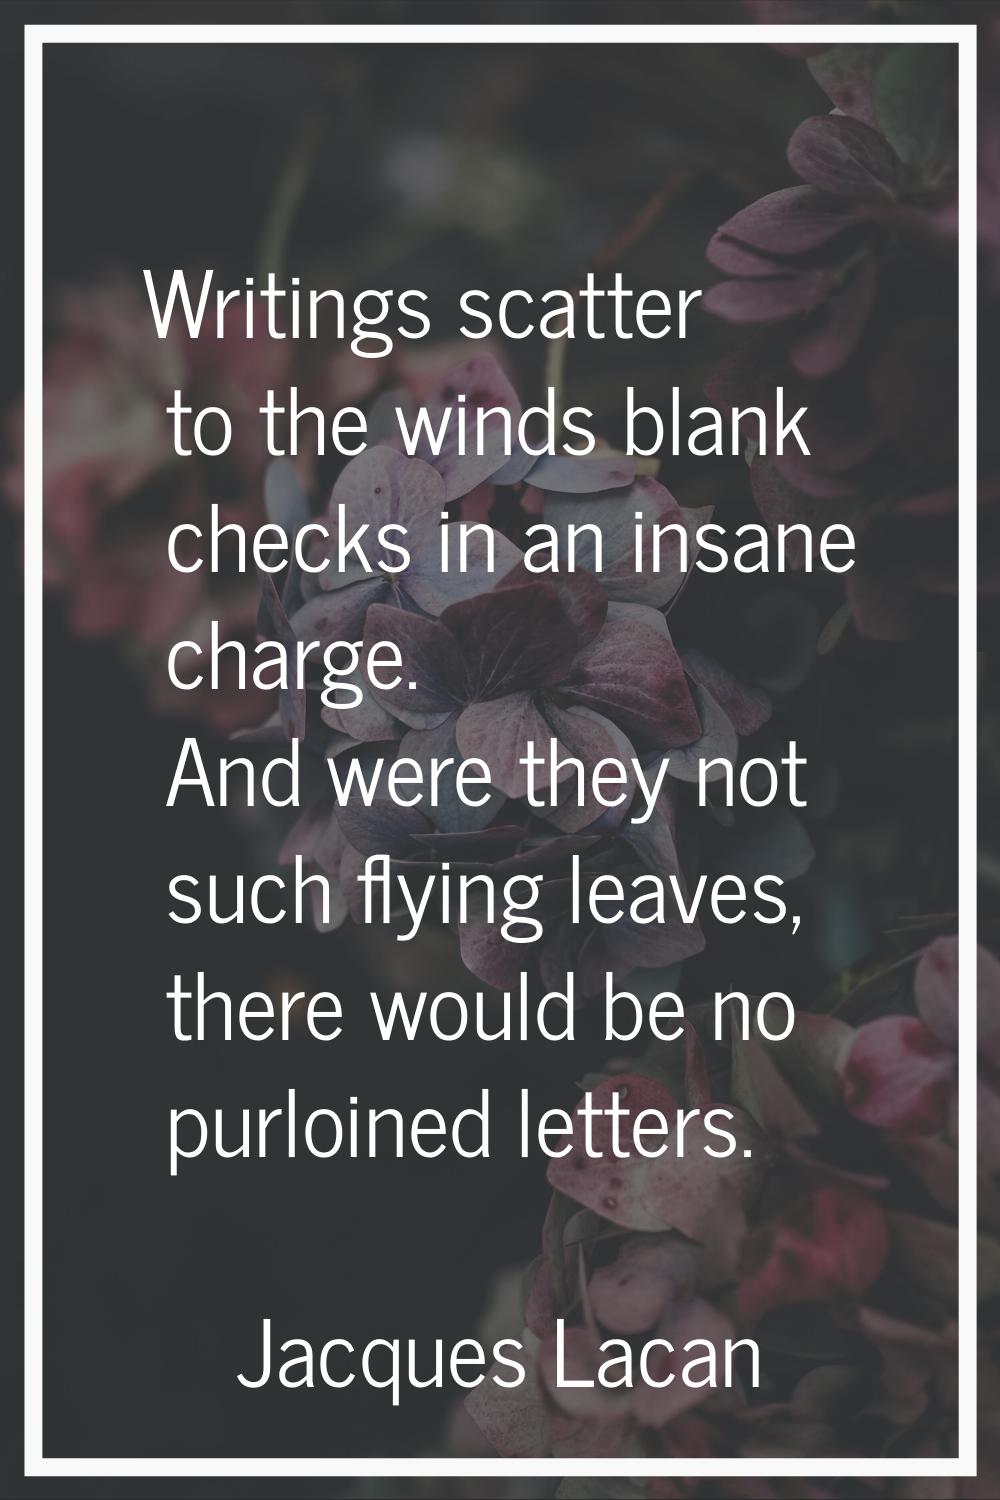 Writings scatter to the winds blank checks in an insane charge. And were they not such flying leave